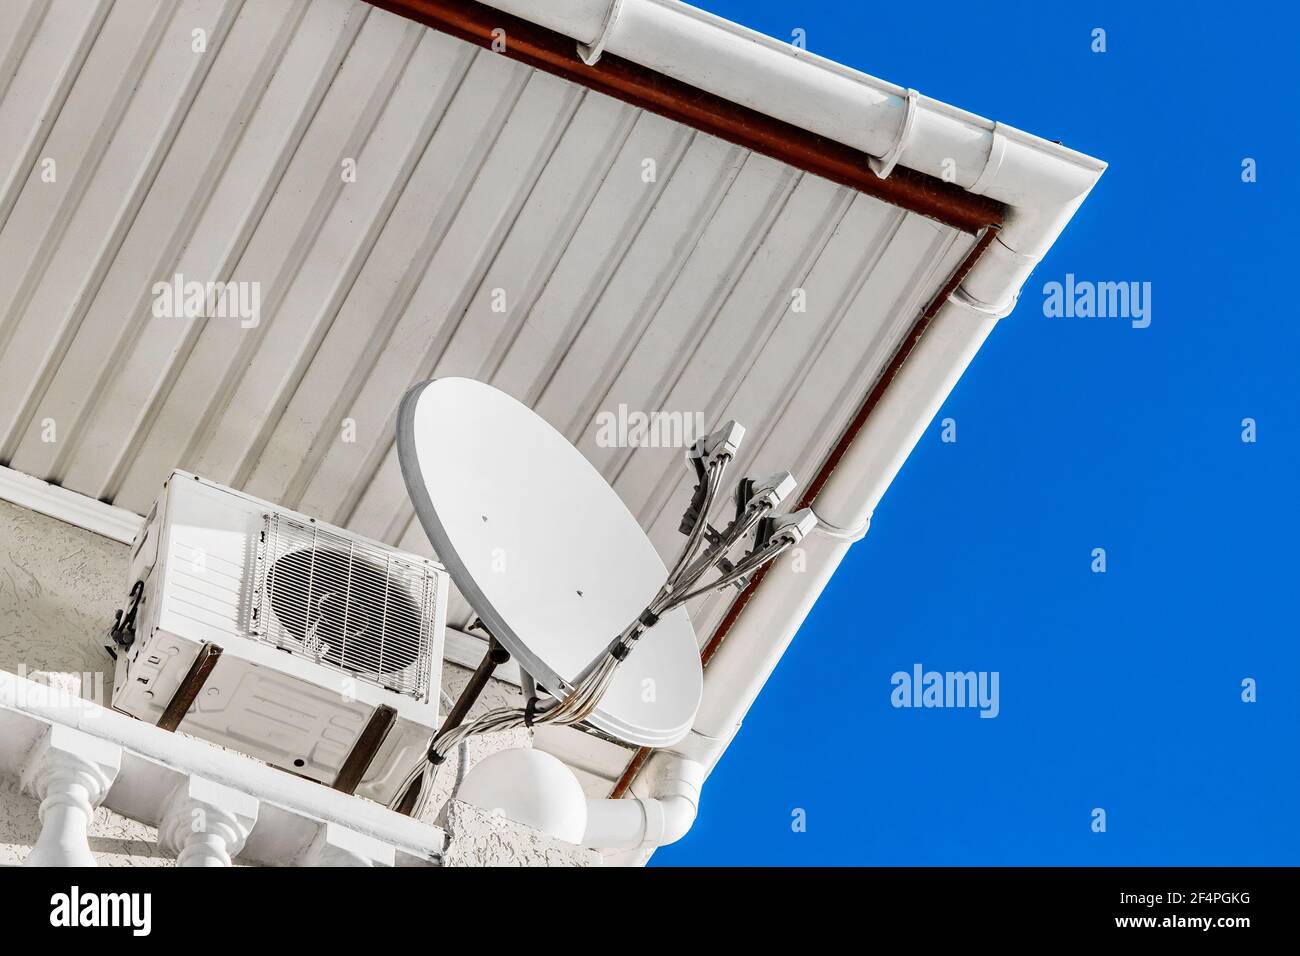 Satellite antenna transmitting signal next to the air conditioning under the roof of the hotel against the blue sky. Stock Photo